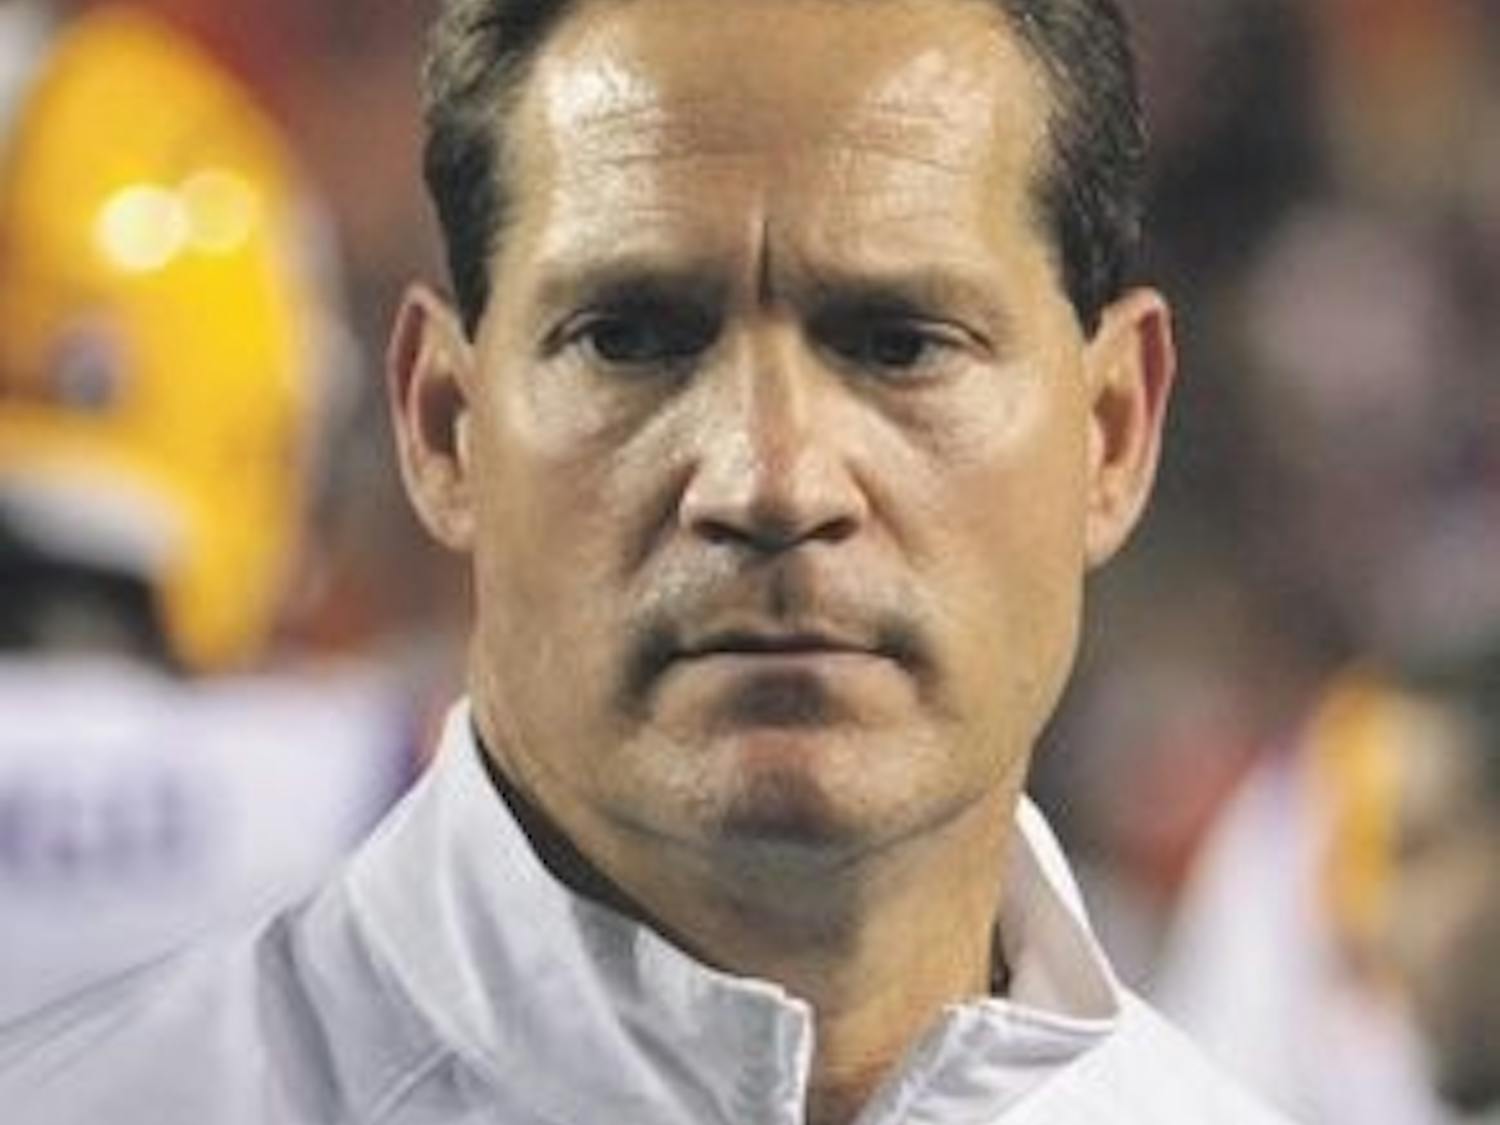 Head football coach Gene Chizik's mother passed away Monday morning at age 87. (Rebecca Croomes / PHOTO EDITOR)